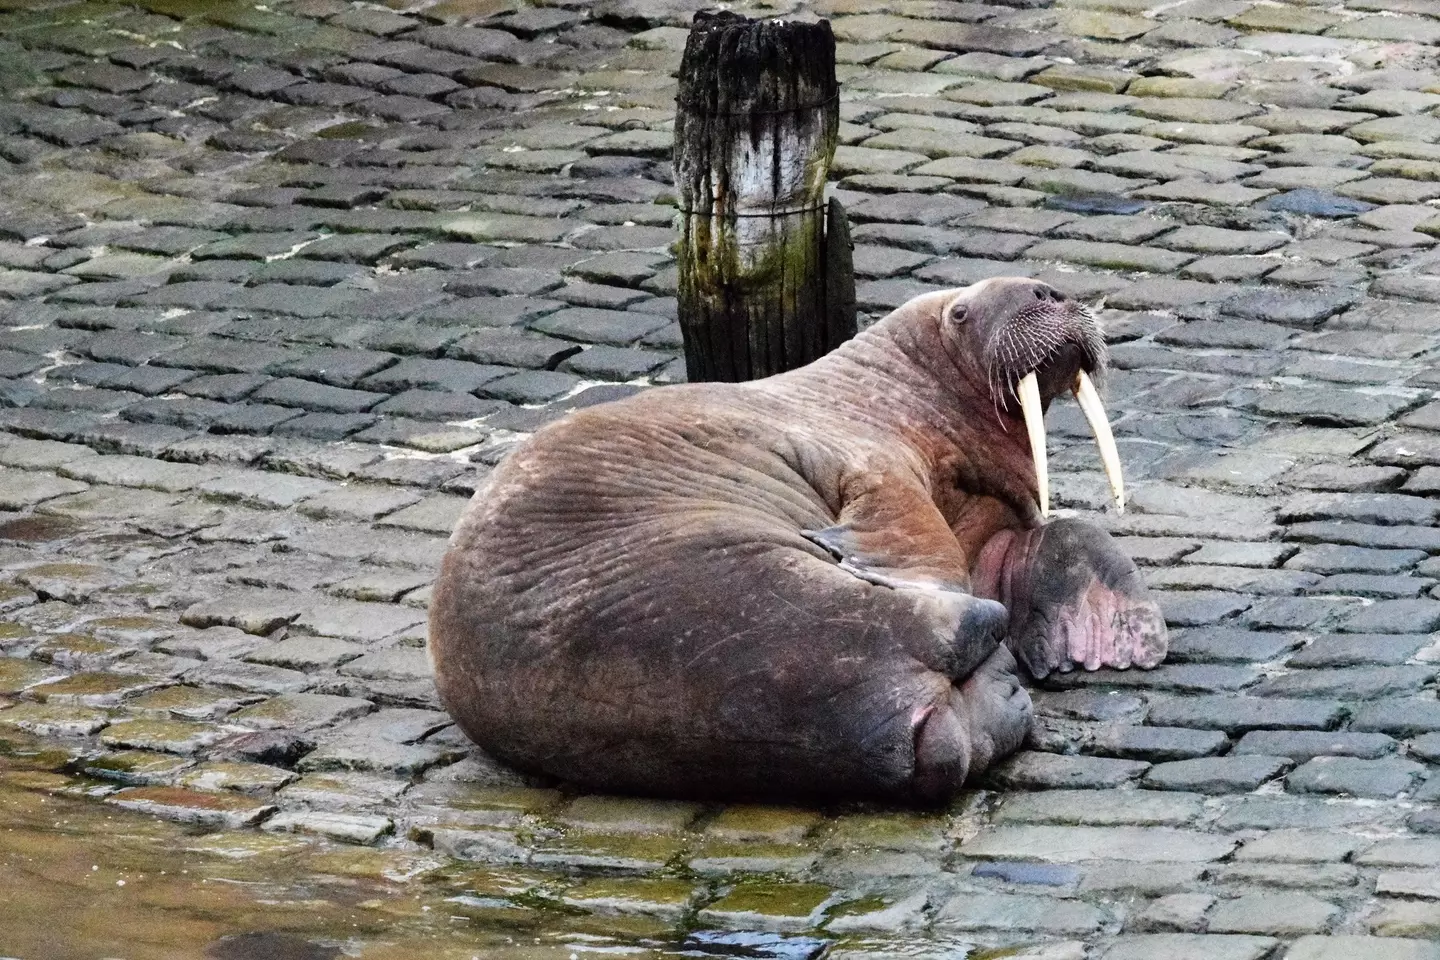 Thor the walrus suddenly showed up in Scarborough harbour.